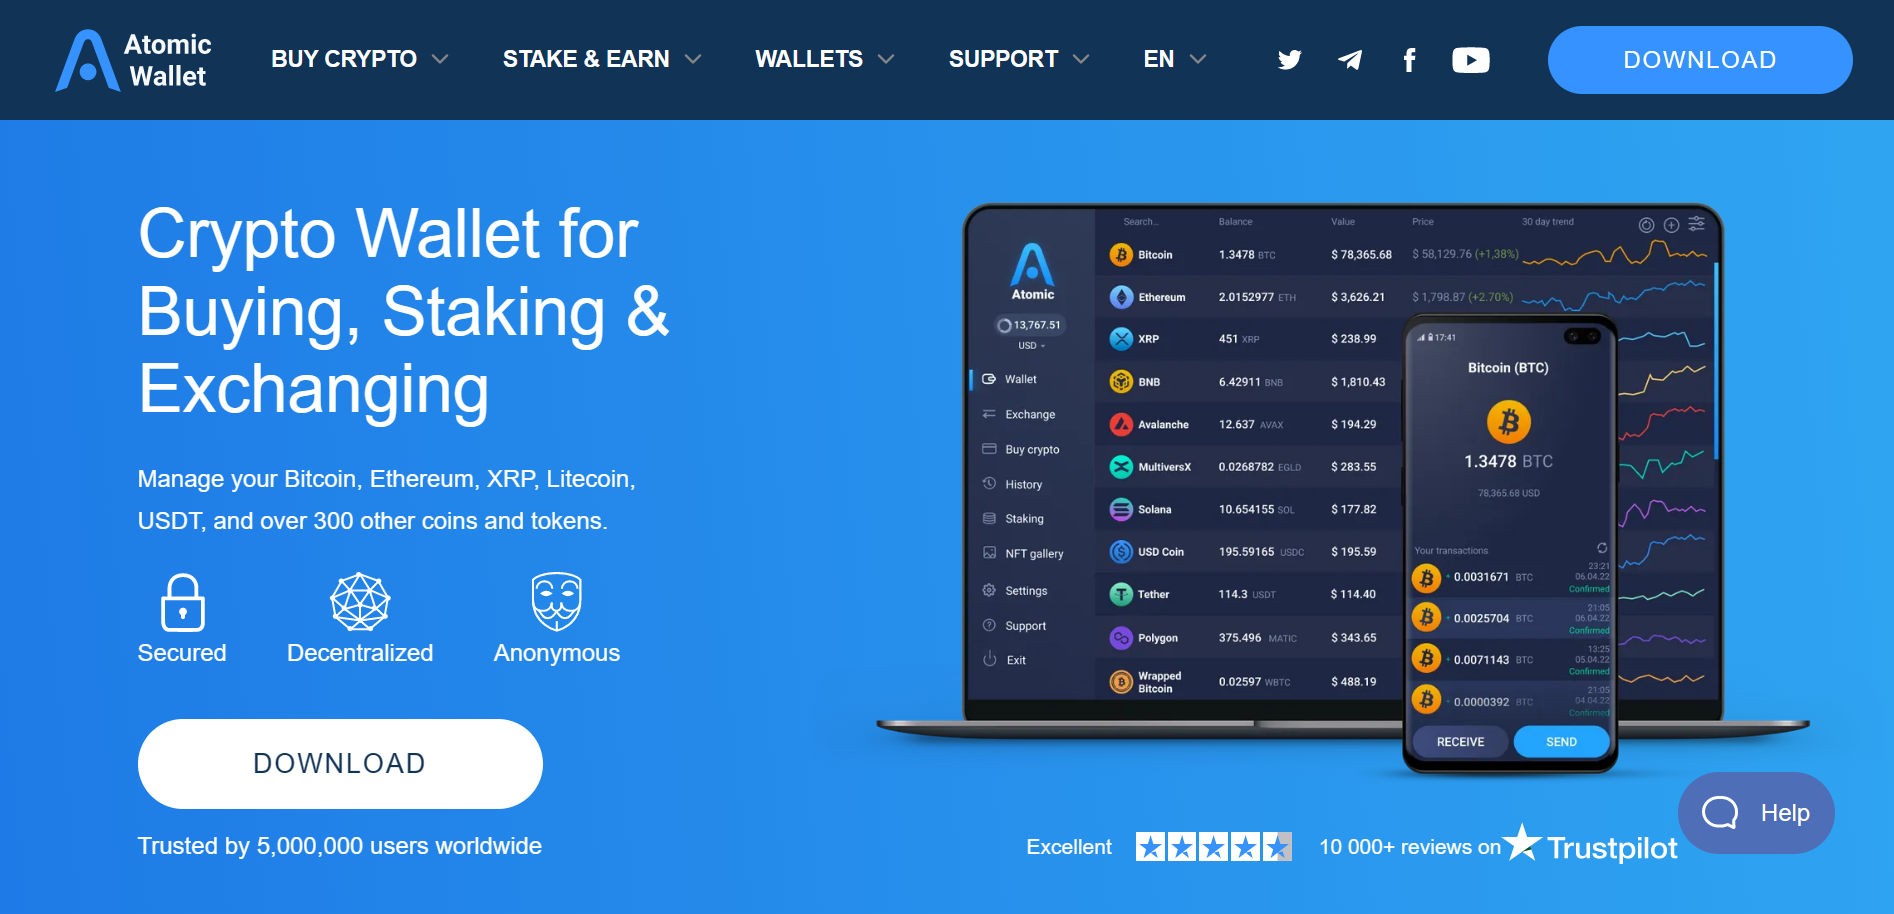 Atomic-Wallet- Best Crypto Wallet